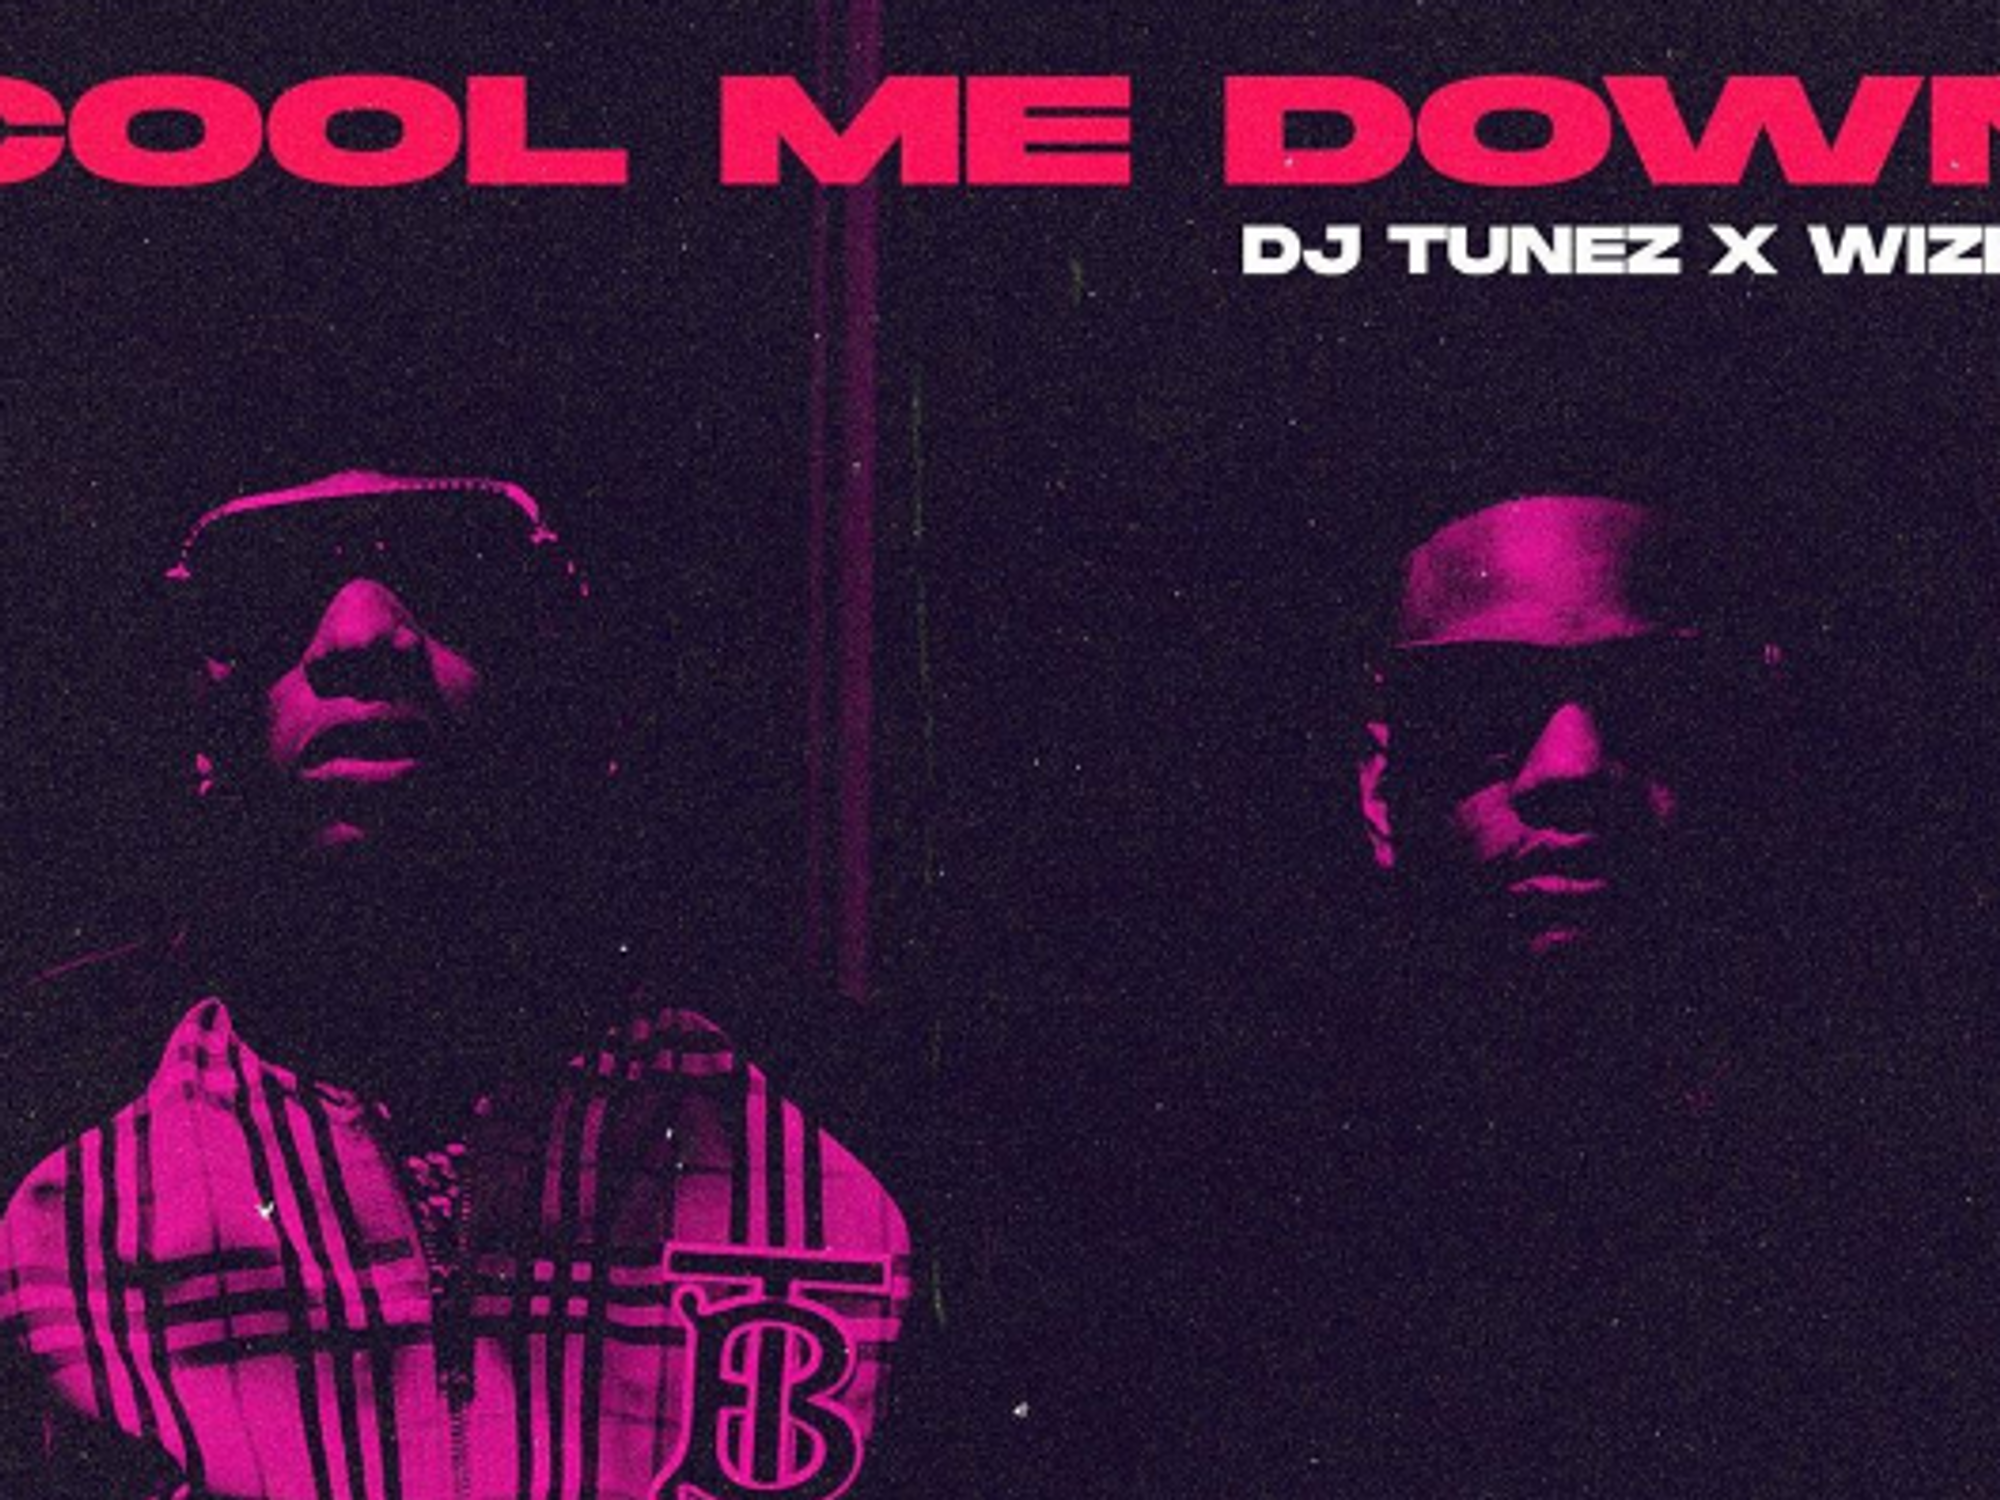 Wizkid and DJ Tunez Team Up Once Again For 'Cool Me Down'